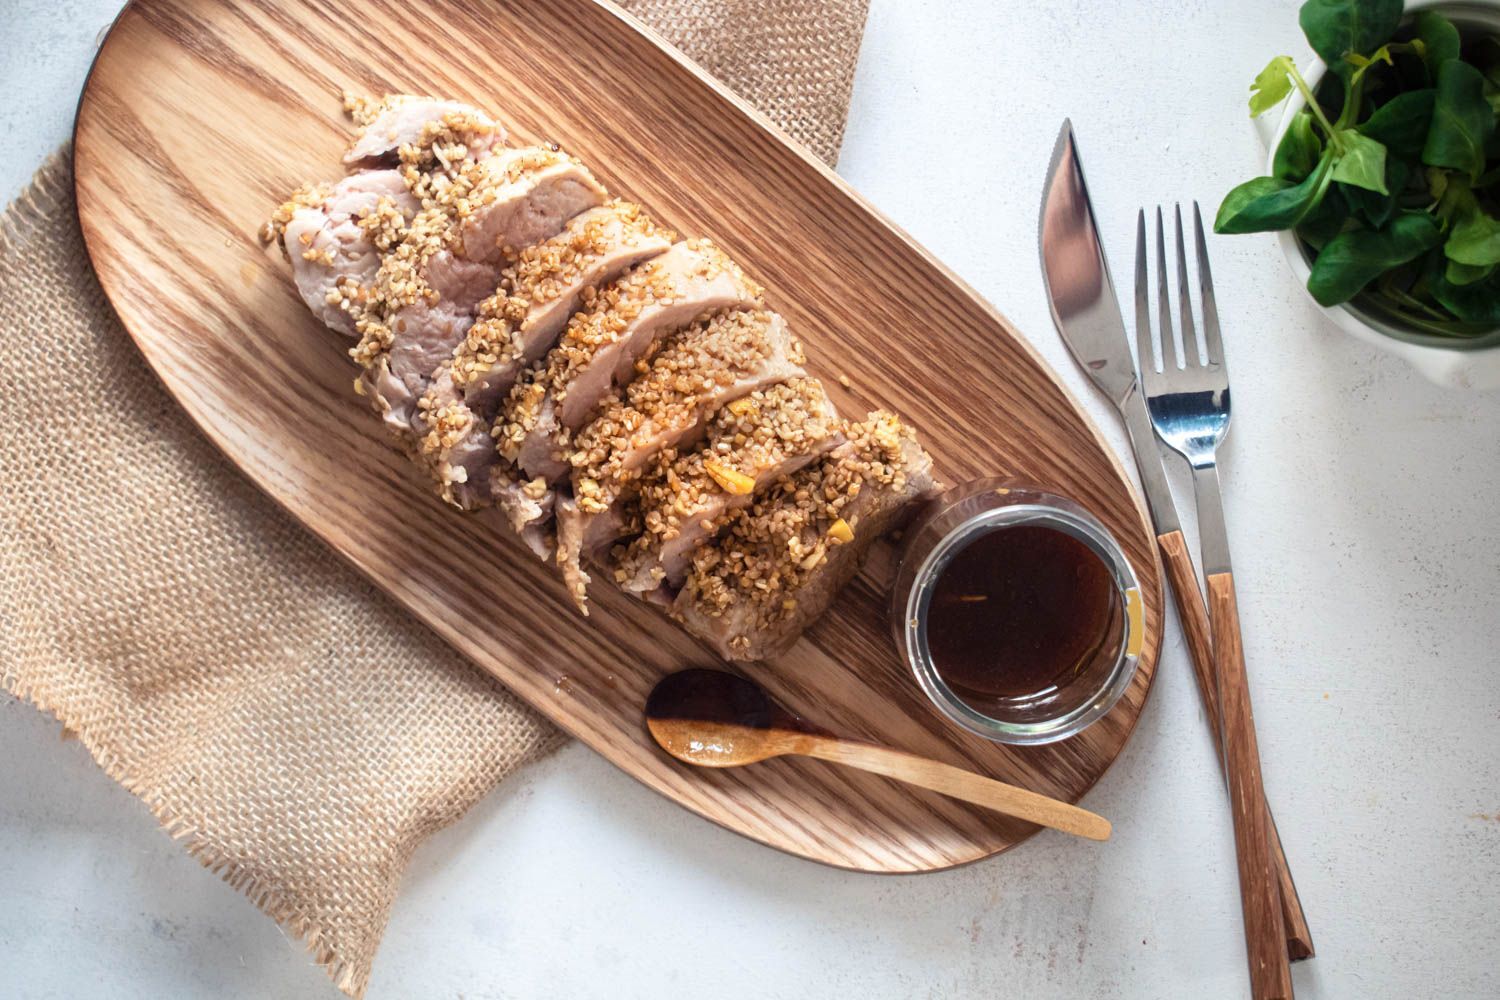 Honey pork tenderloin coated with sesame seeds sliced on a wooden board with a soy garlic marinade on the side.